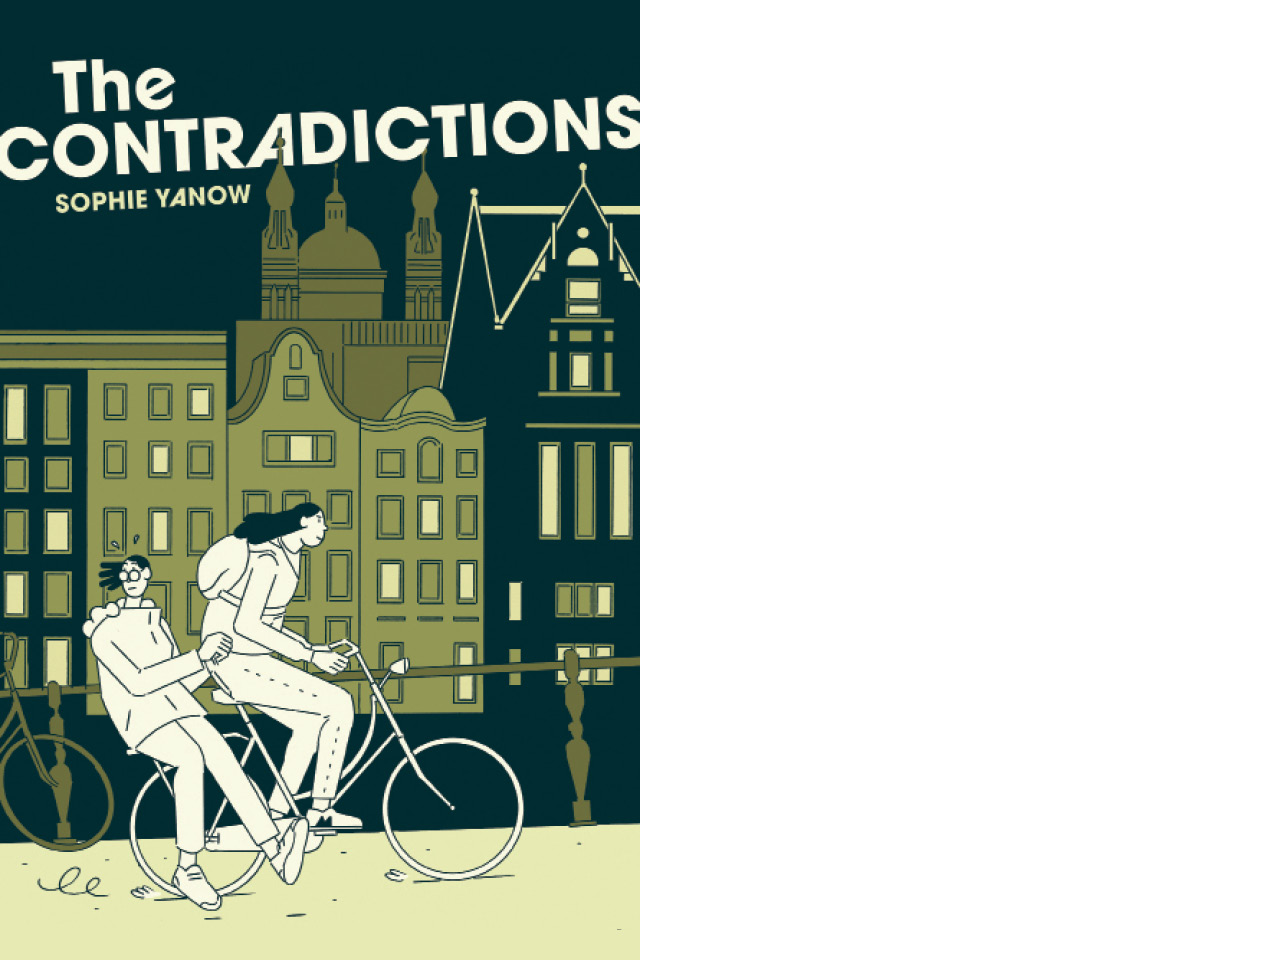 The cover of the Contradictions